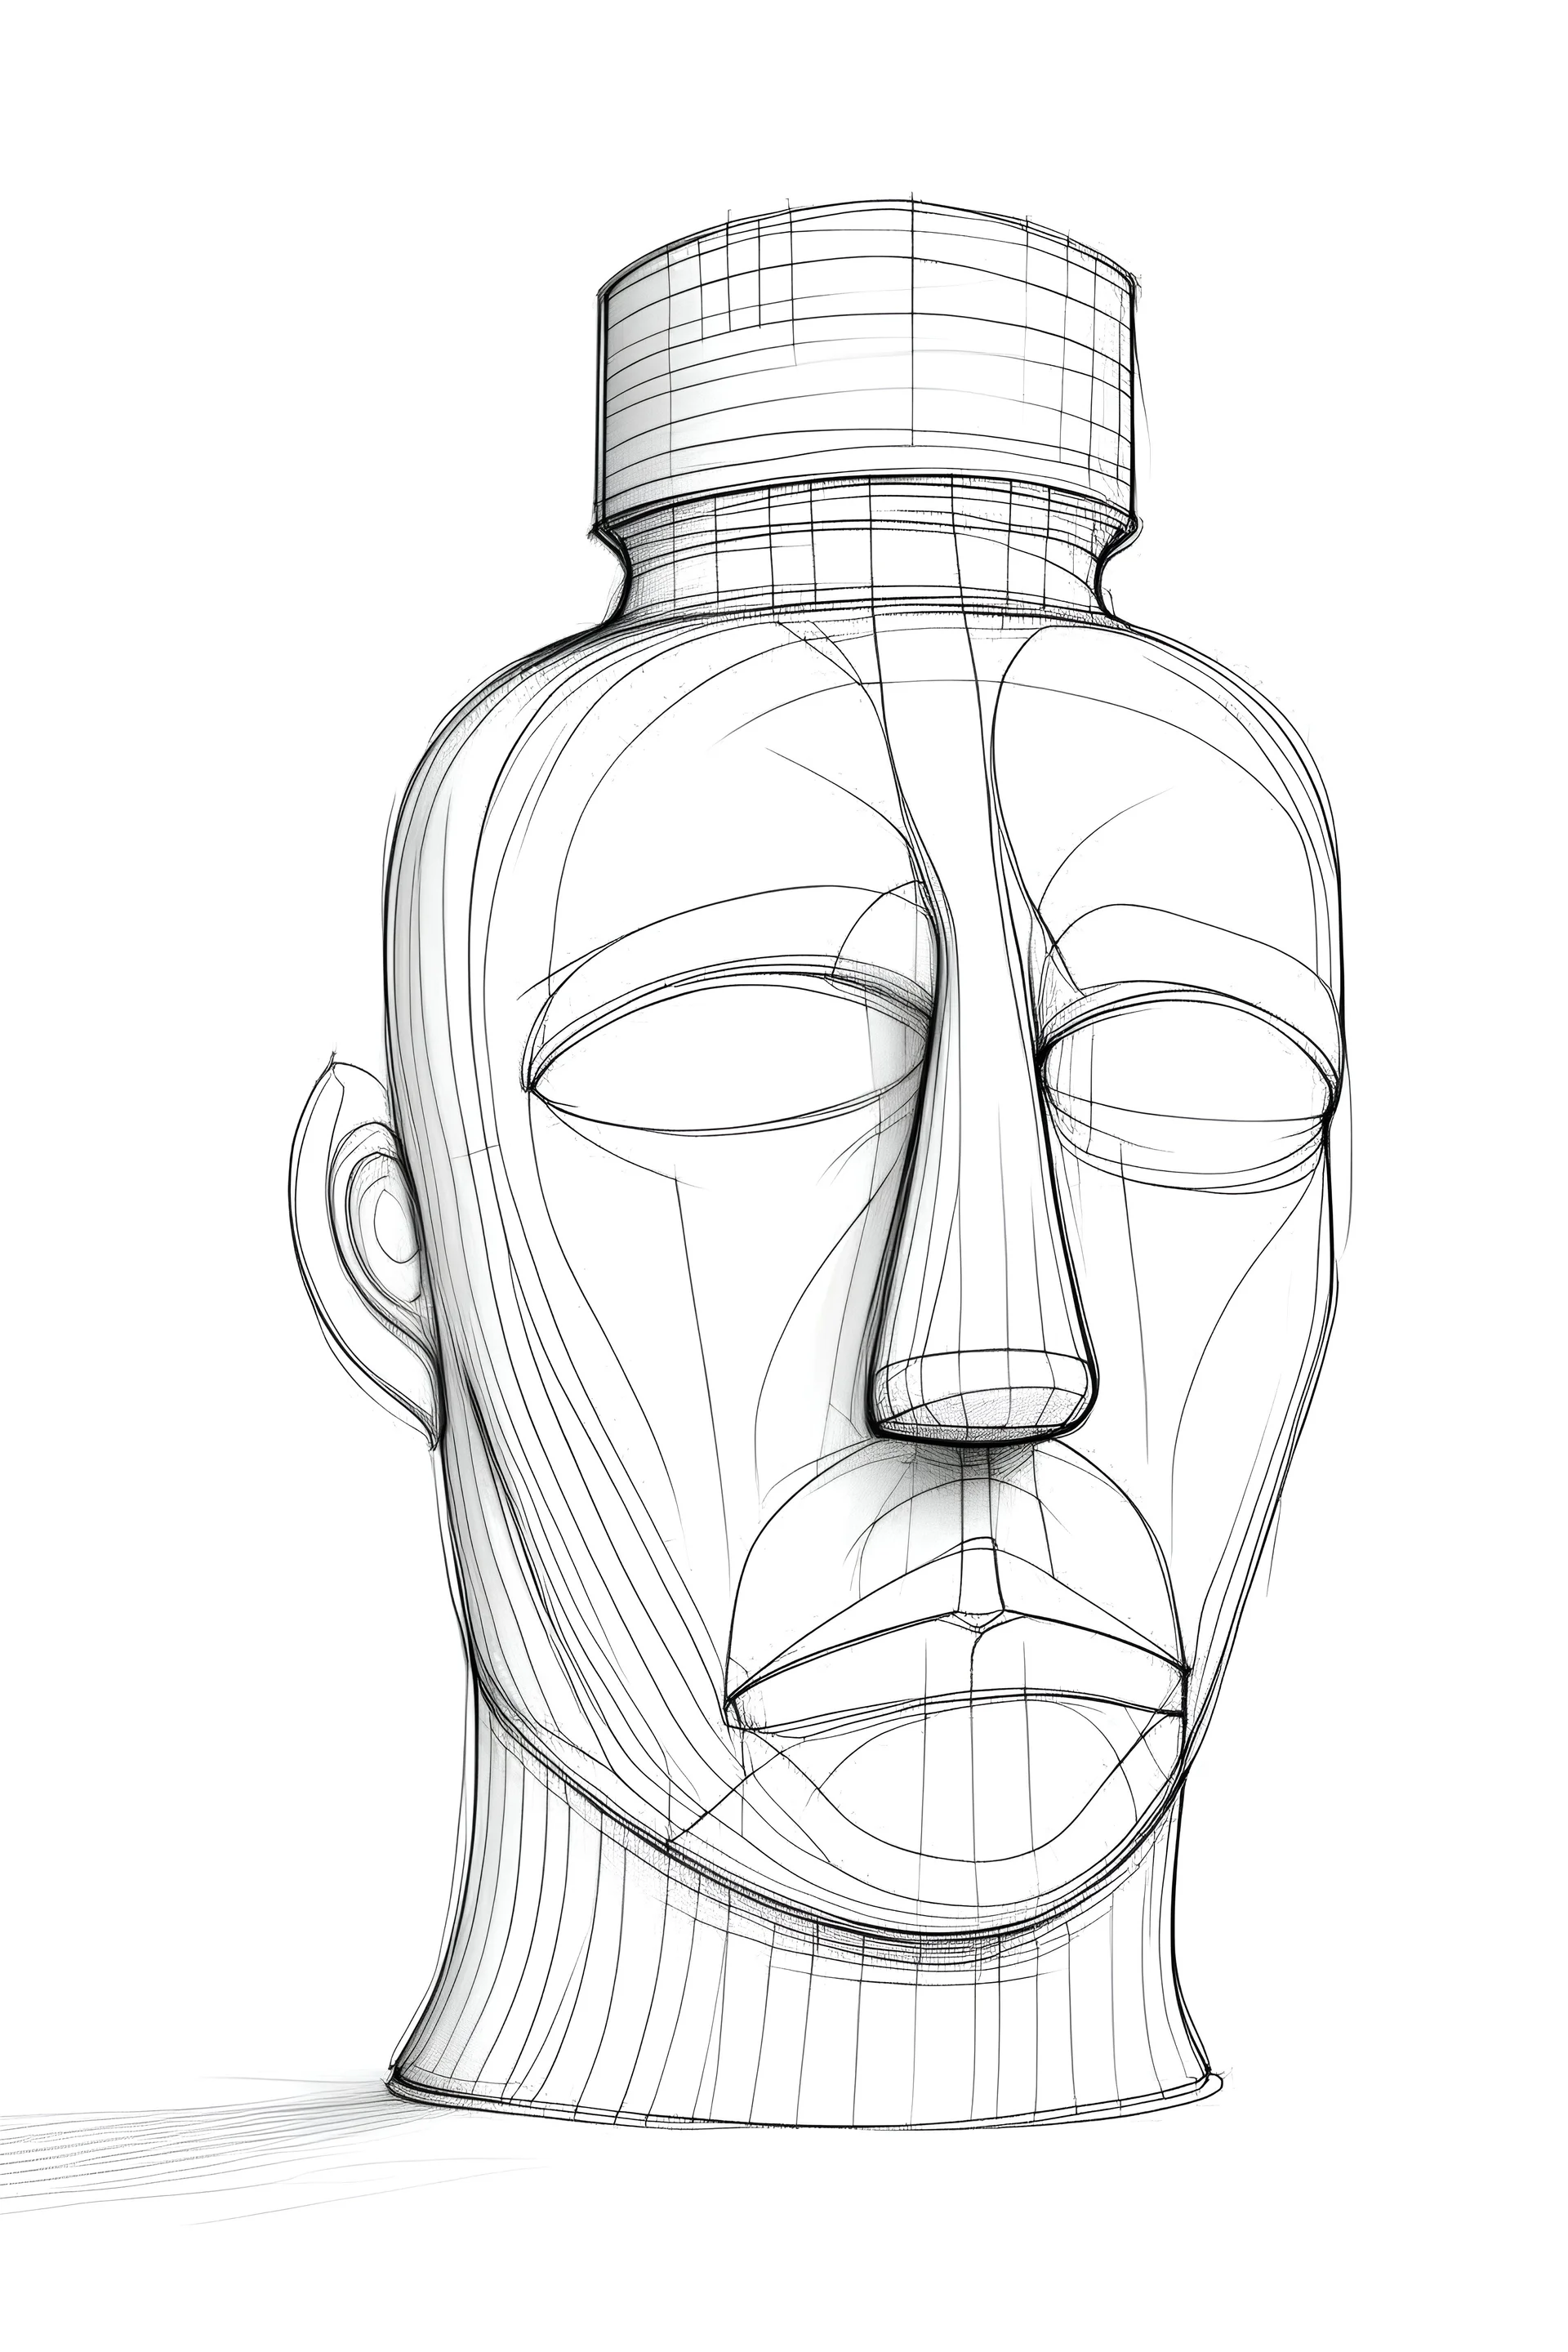 perfume shaped head with reinforced concrete on white background drawing graphics